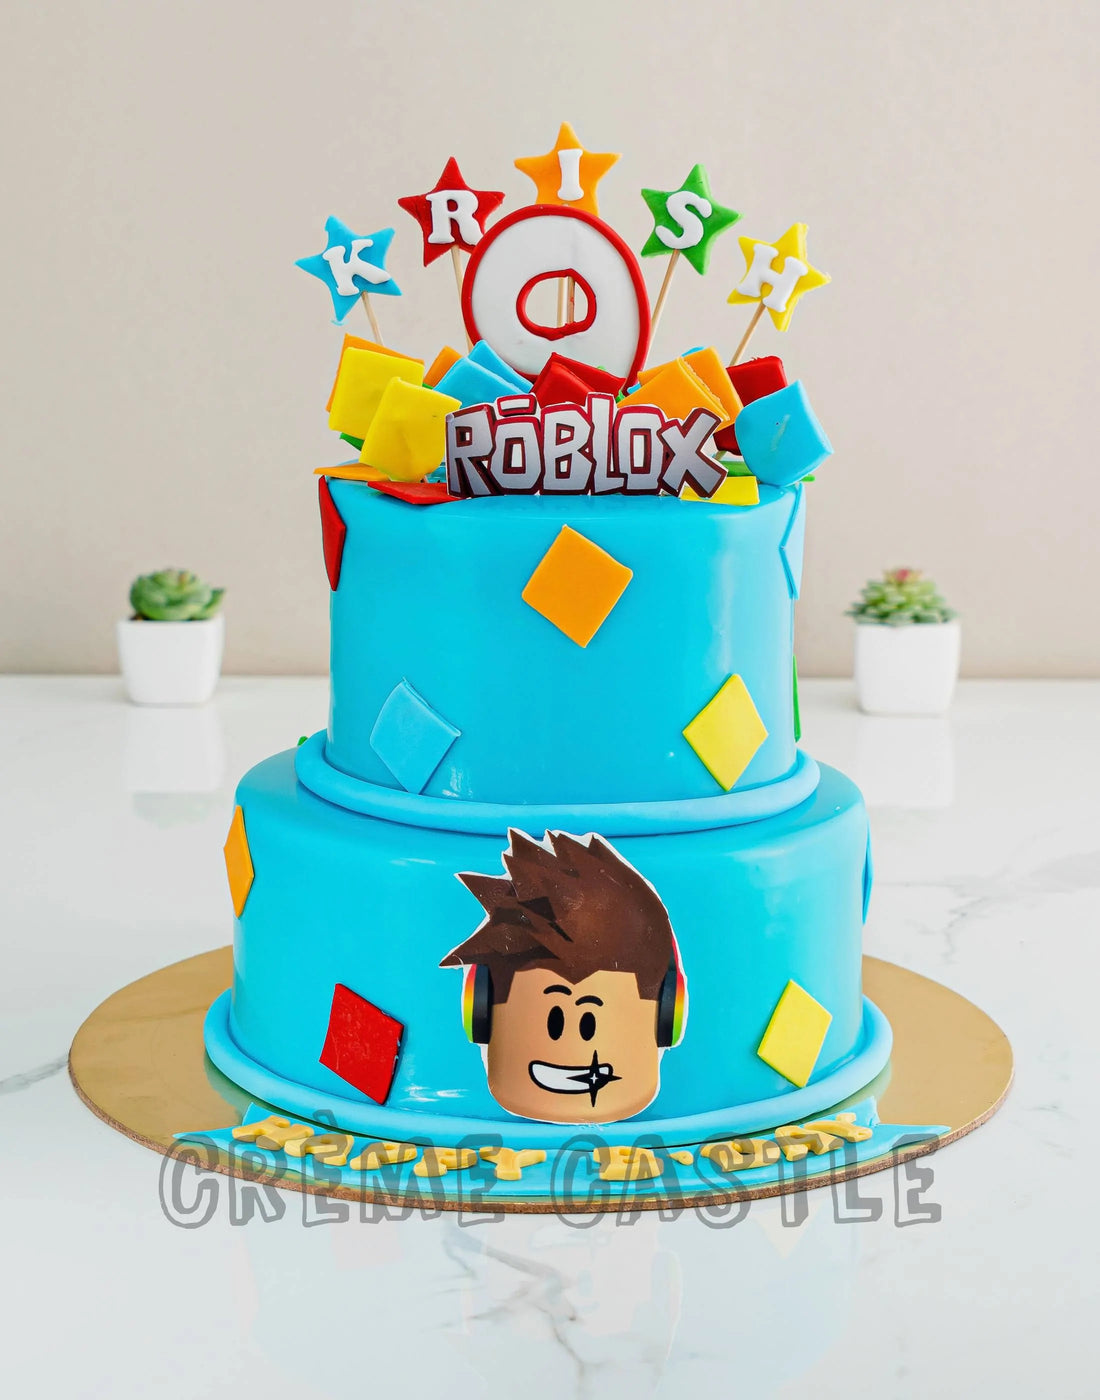 Roblox Theme Cake in 2 Tier by Creme Castle